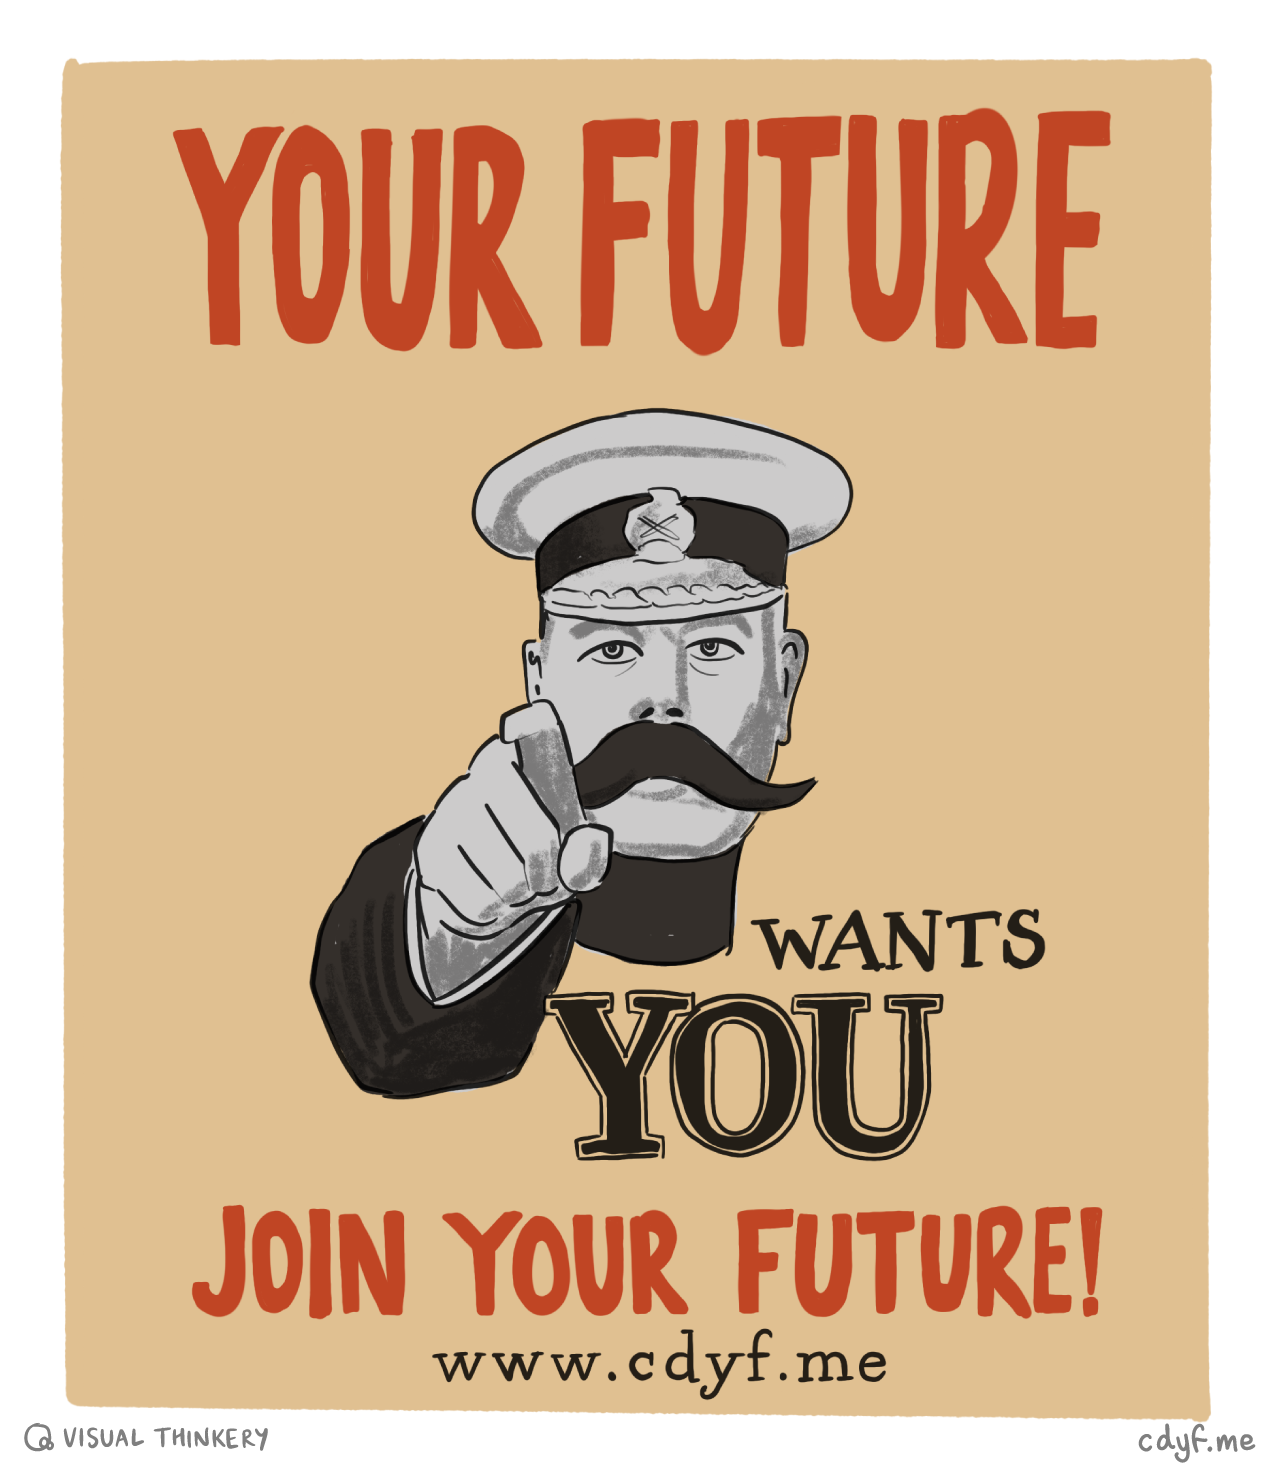 Your Country Future Wants YOU. 🫵 Join your future. If you are a former student of Computer Science who’d like to appear on the show, get in touch. I’m especially interested to hear from students who did internships or placements before they graduated in Computer Science. Your Future Needs You sketch by Visual Thinkery is licensed under CC-BY-ND inspired by an original public domain image of the Lord Kitchener Wants You poster by Alfred Leete on Wikimedia Commons at w.wiki/3xvX